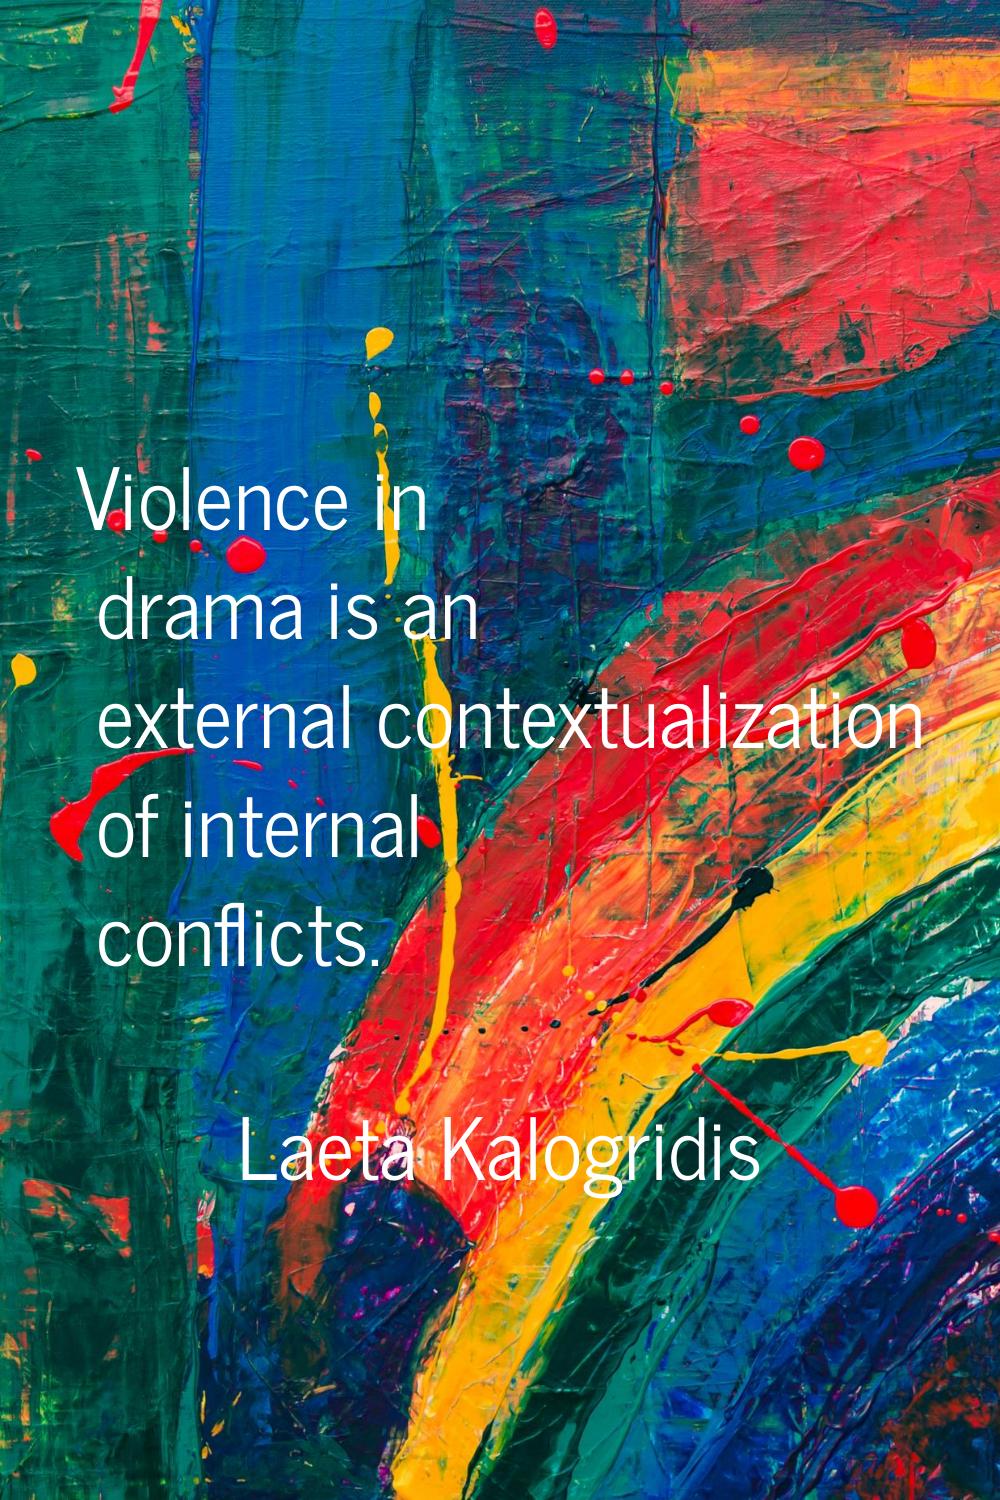 Violence in drama is an external contextualization of internal conflicts.